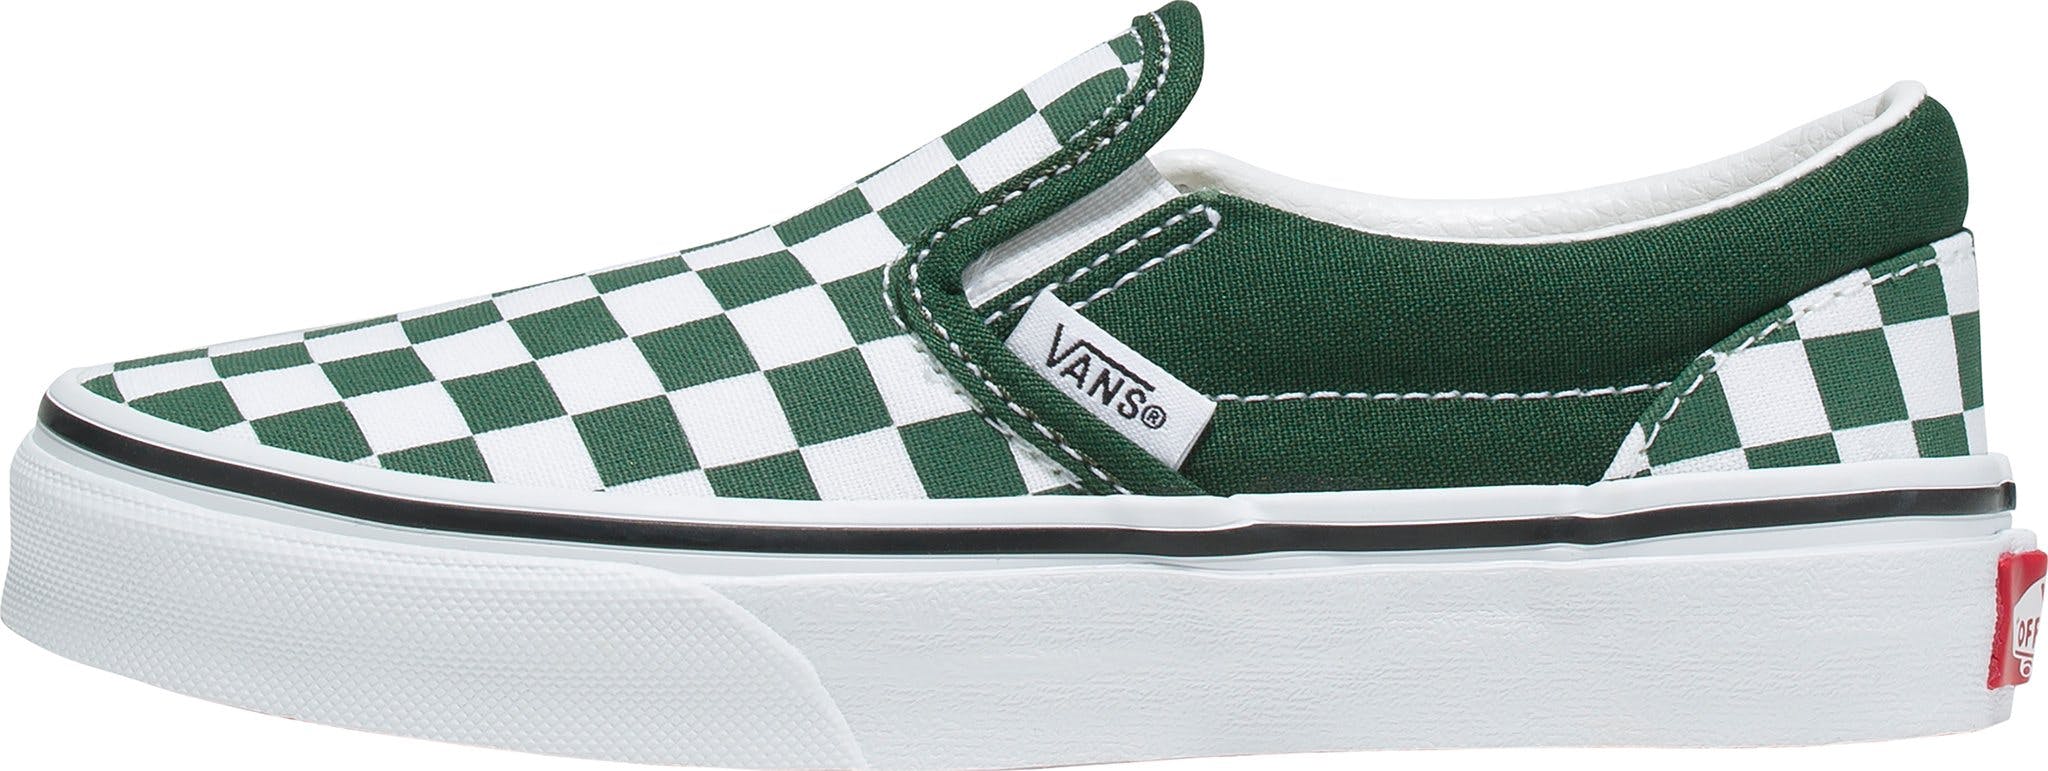 Product image for Classic Slip-On Checkerboard Shoes - Kids